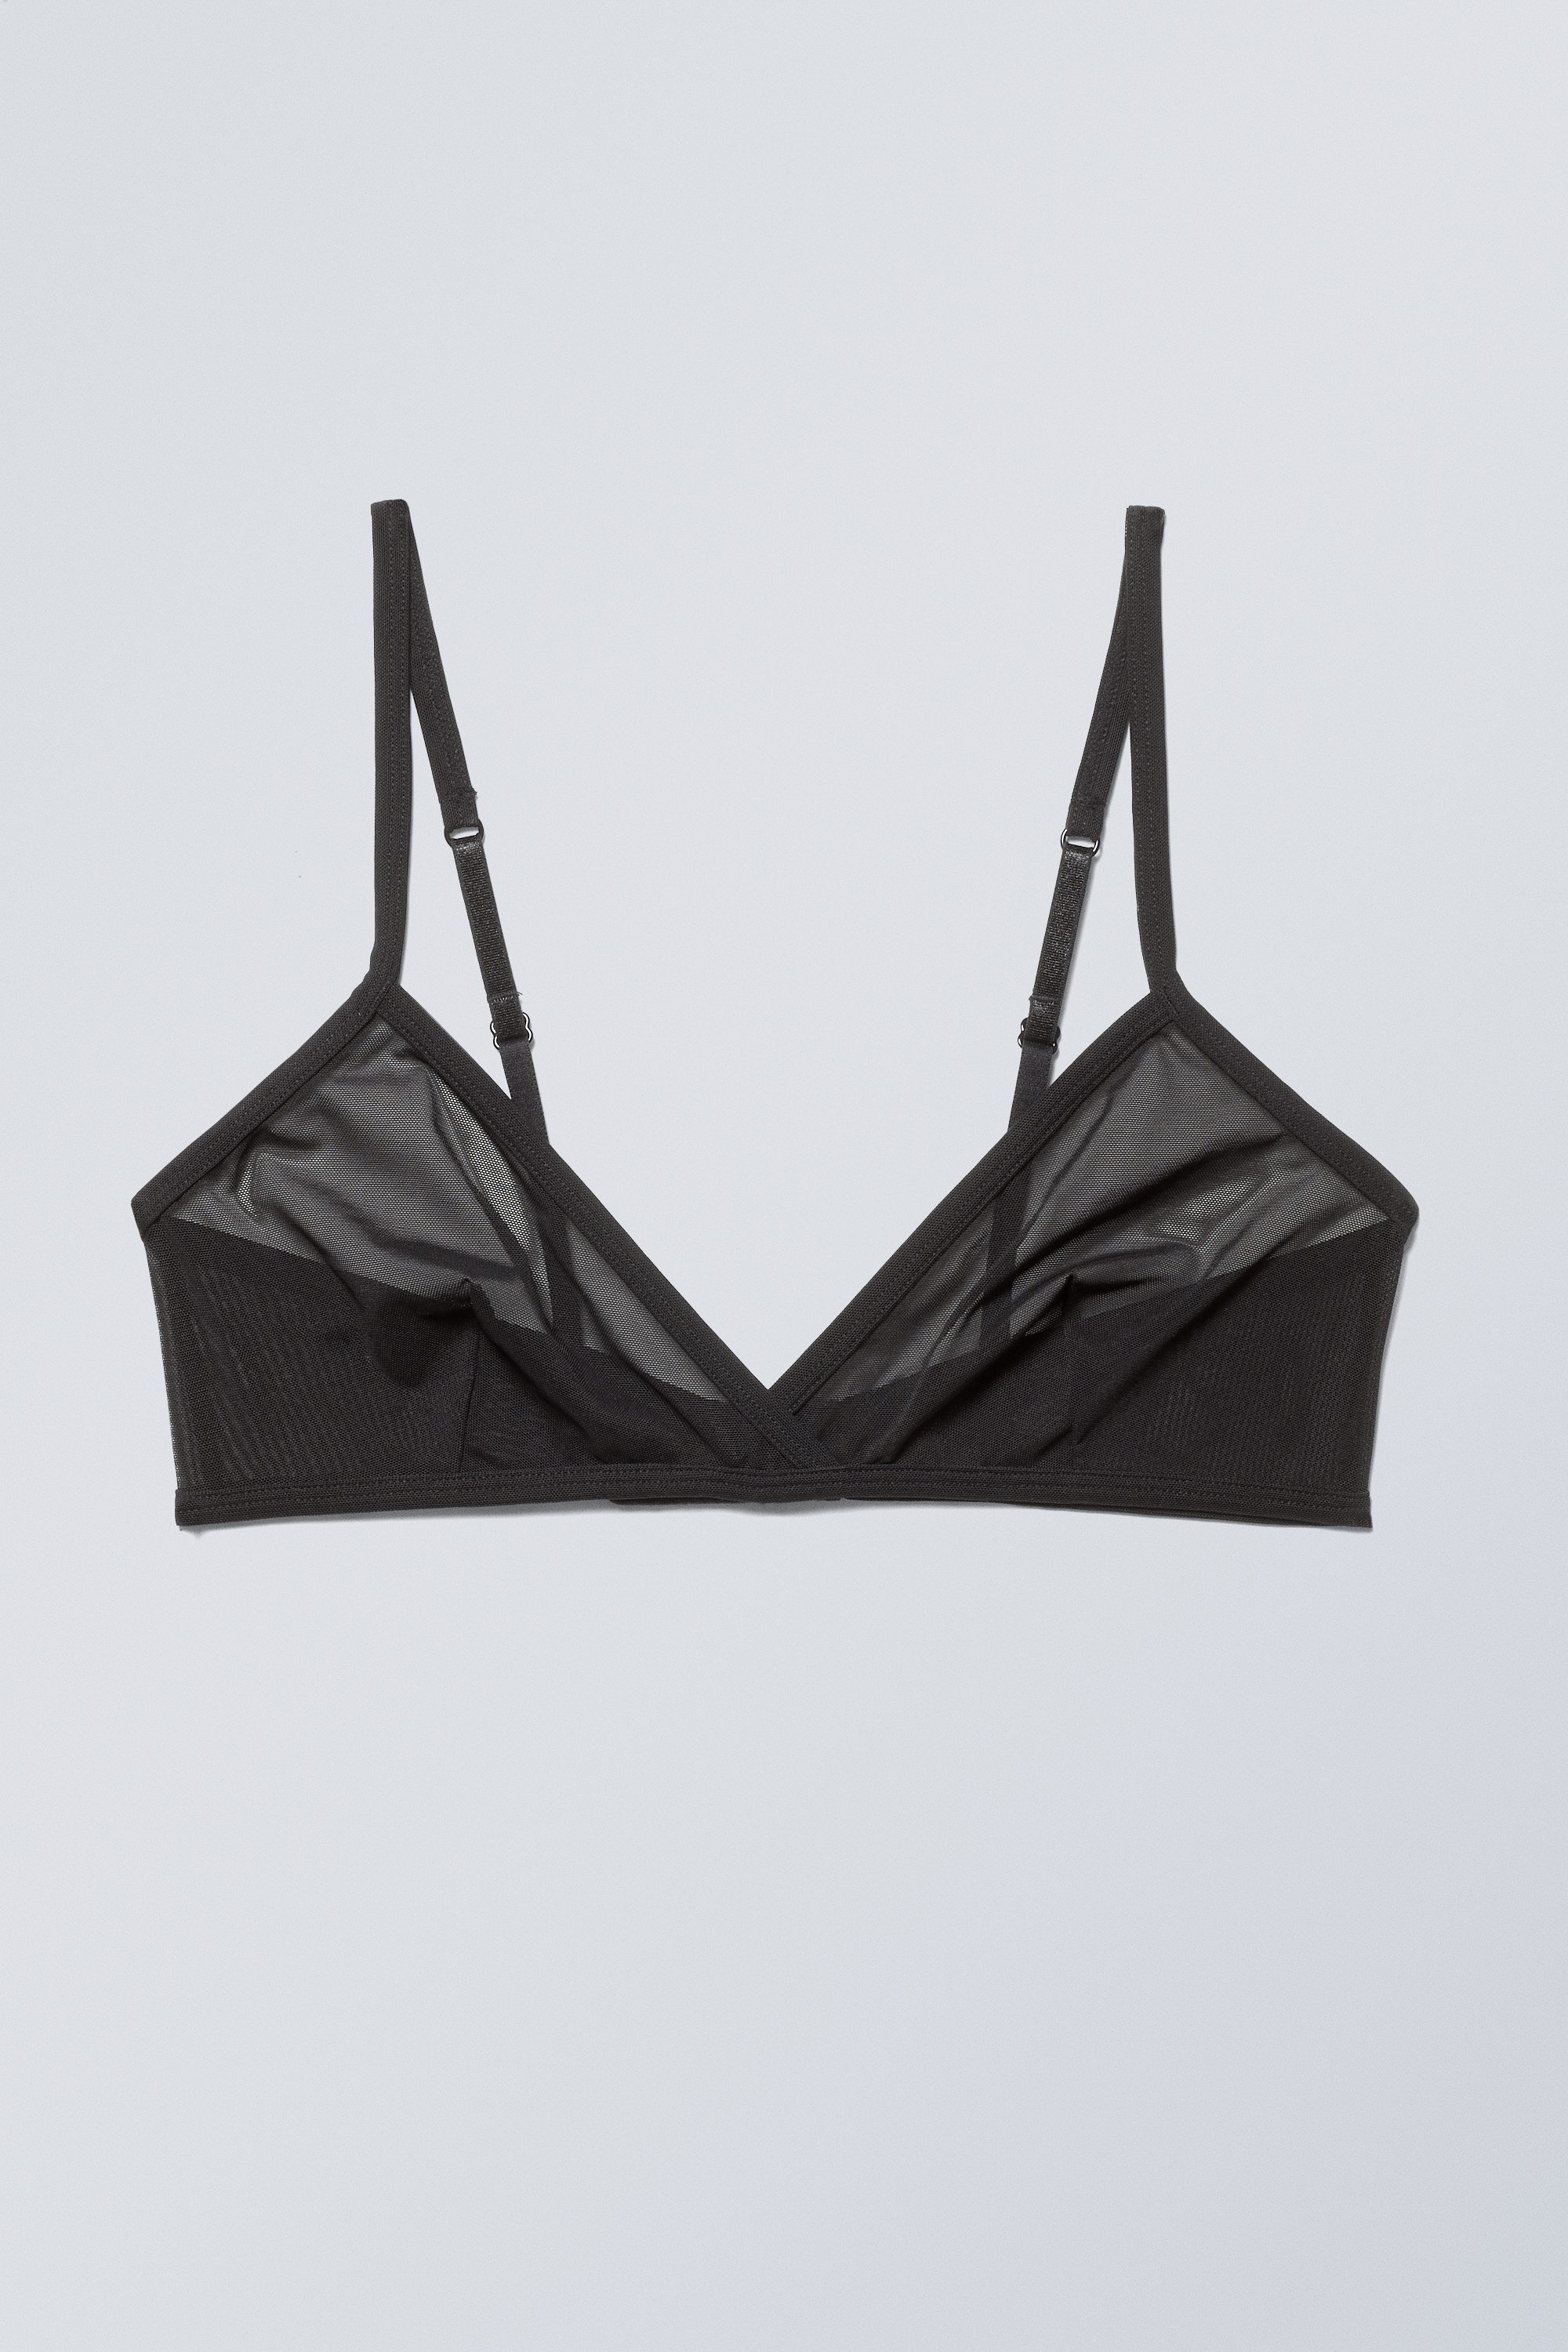 Weekday Molly mesh underwired bra in black - ShopStyle